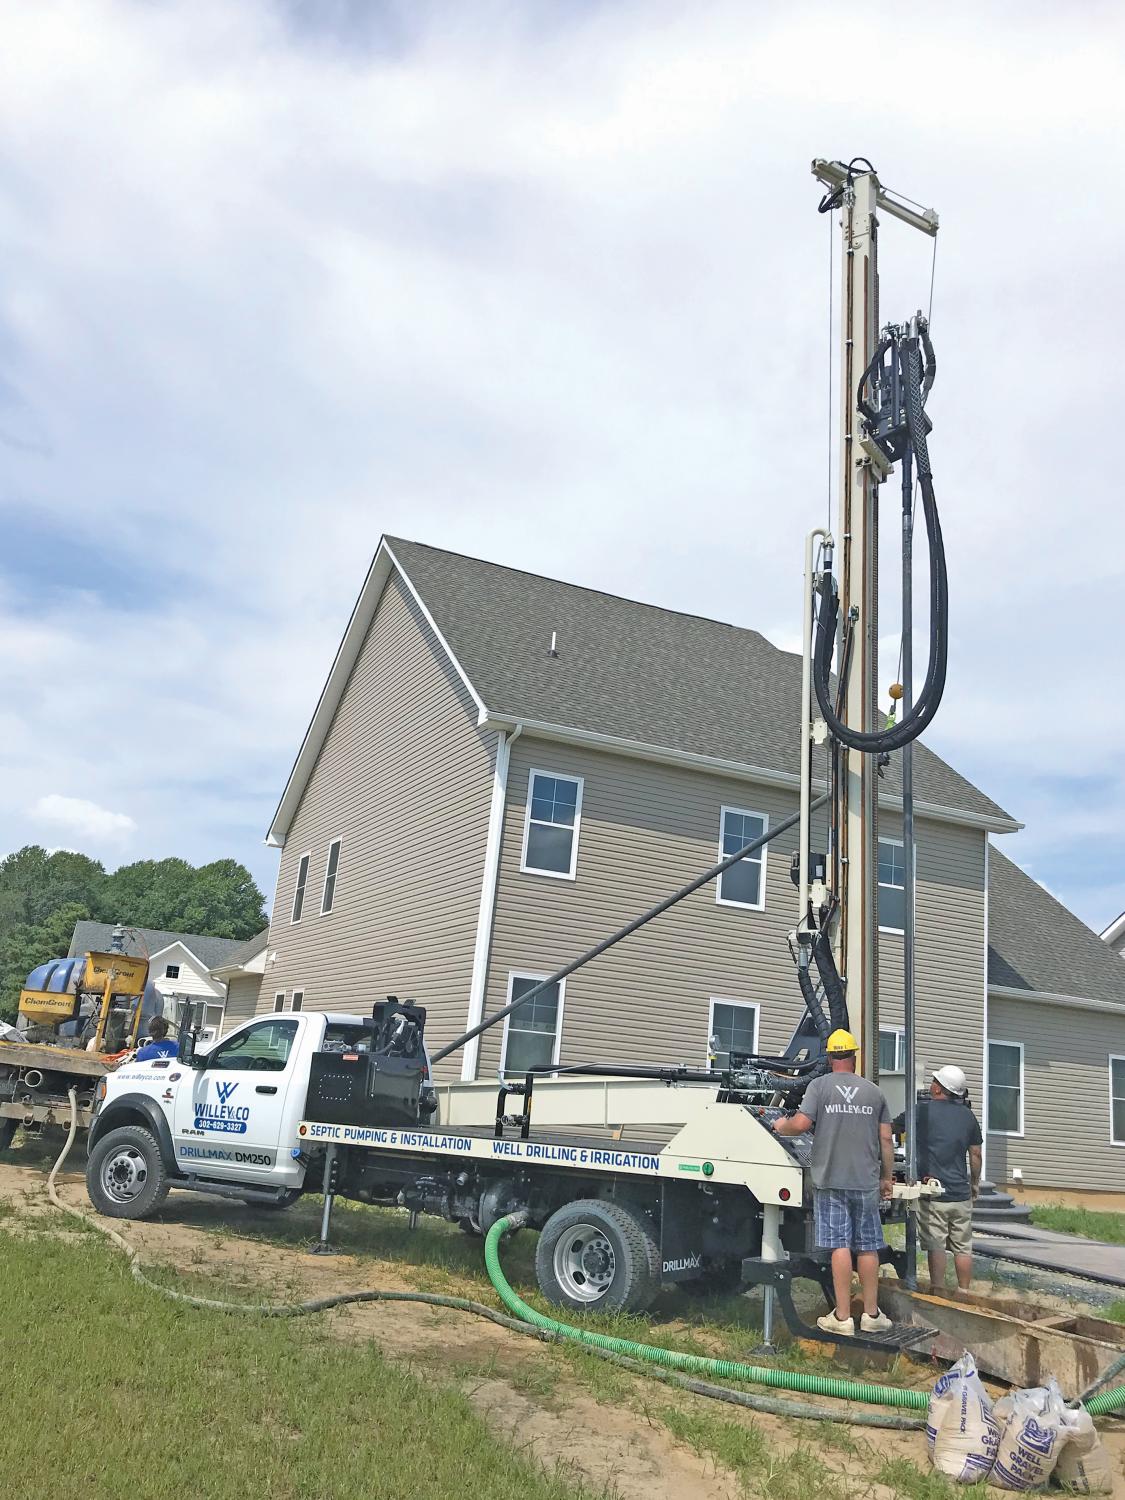 Efficiency of DM250 permits packing more wells into the same time period while compact size eliminates damage to yards, trees, and landscaping in limited access areas in Delaware.